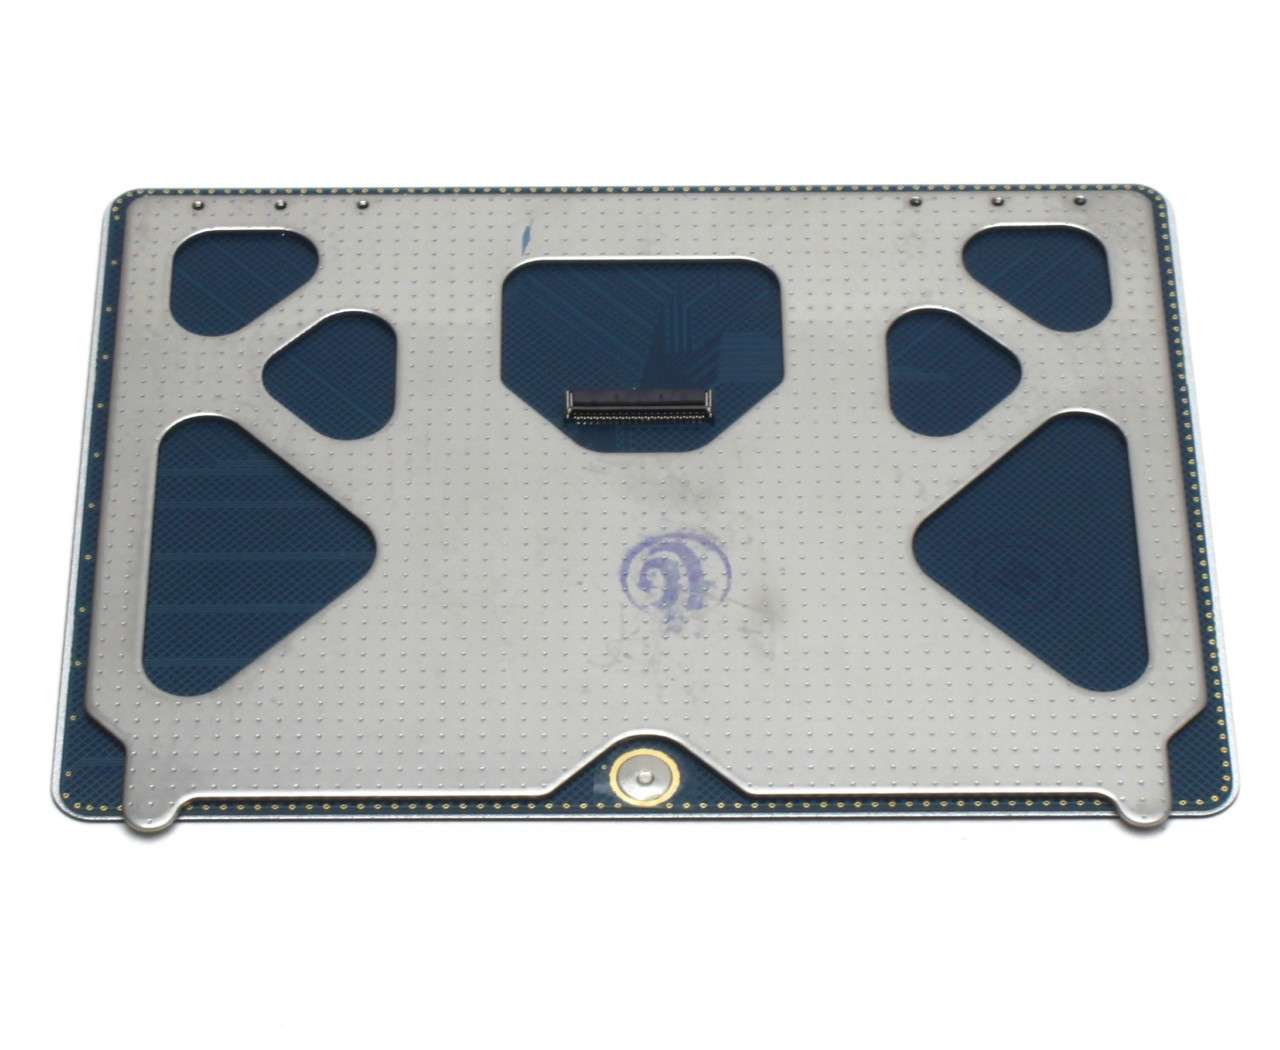 Touchpad Apple Macbook Pro 17 A1297 Early 2011 Trackpad image0